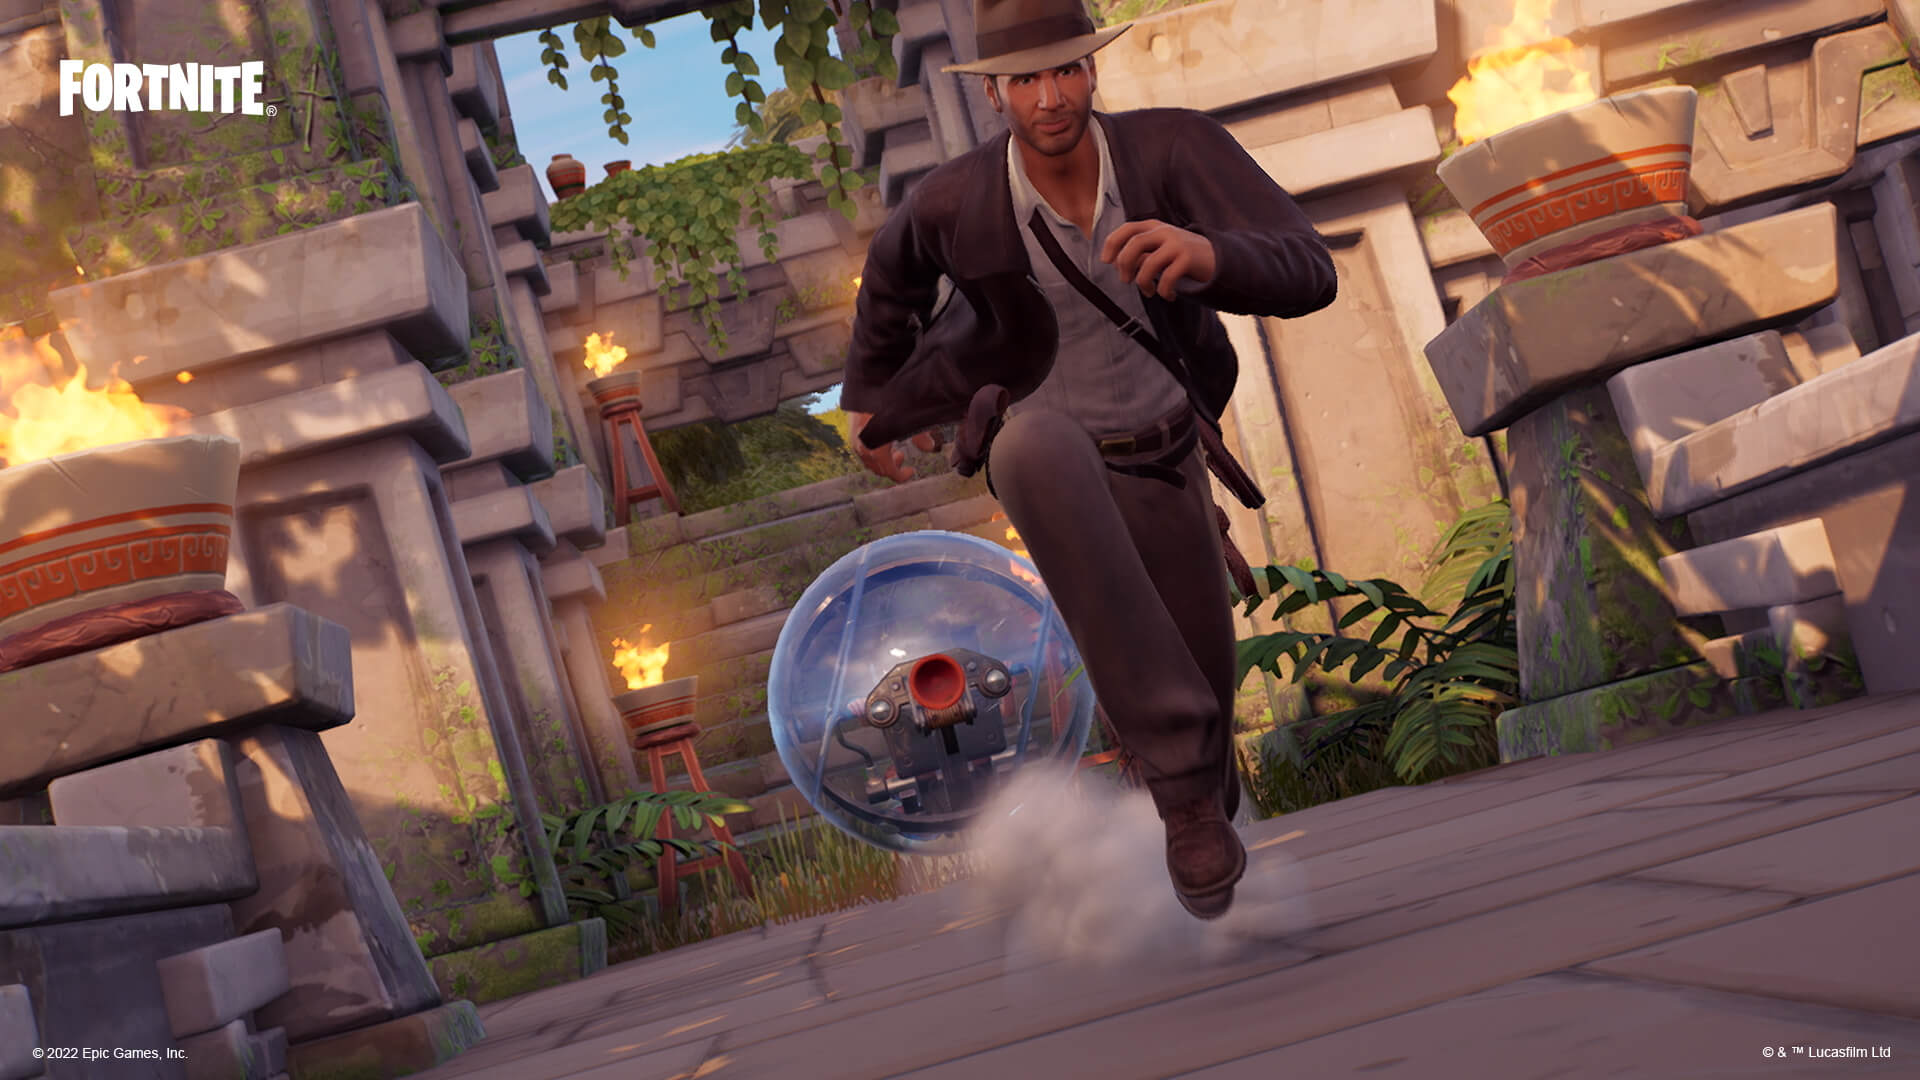 Fortnite update adds Indiana Jones and a new Charge submachine gun